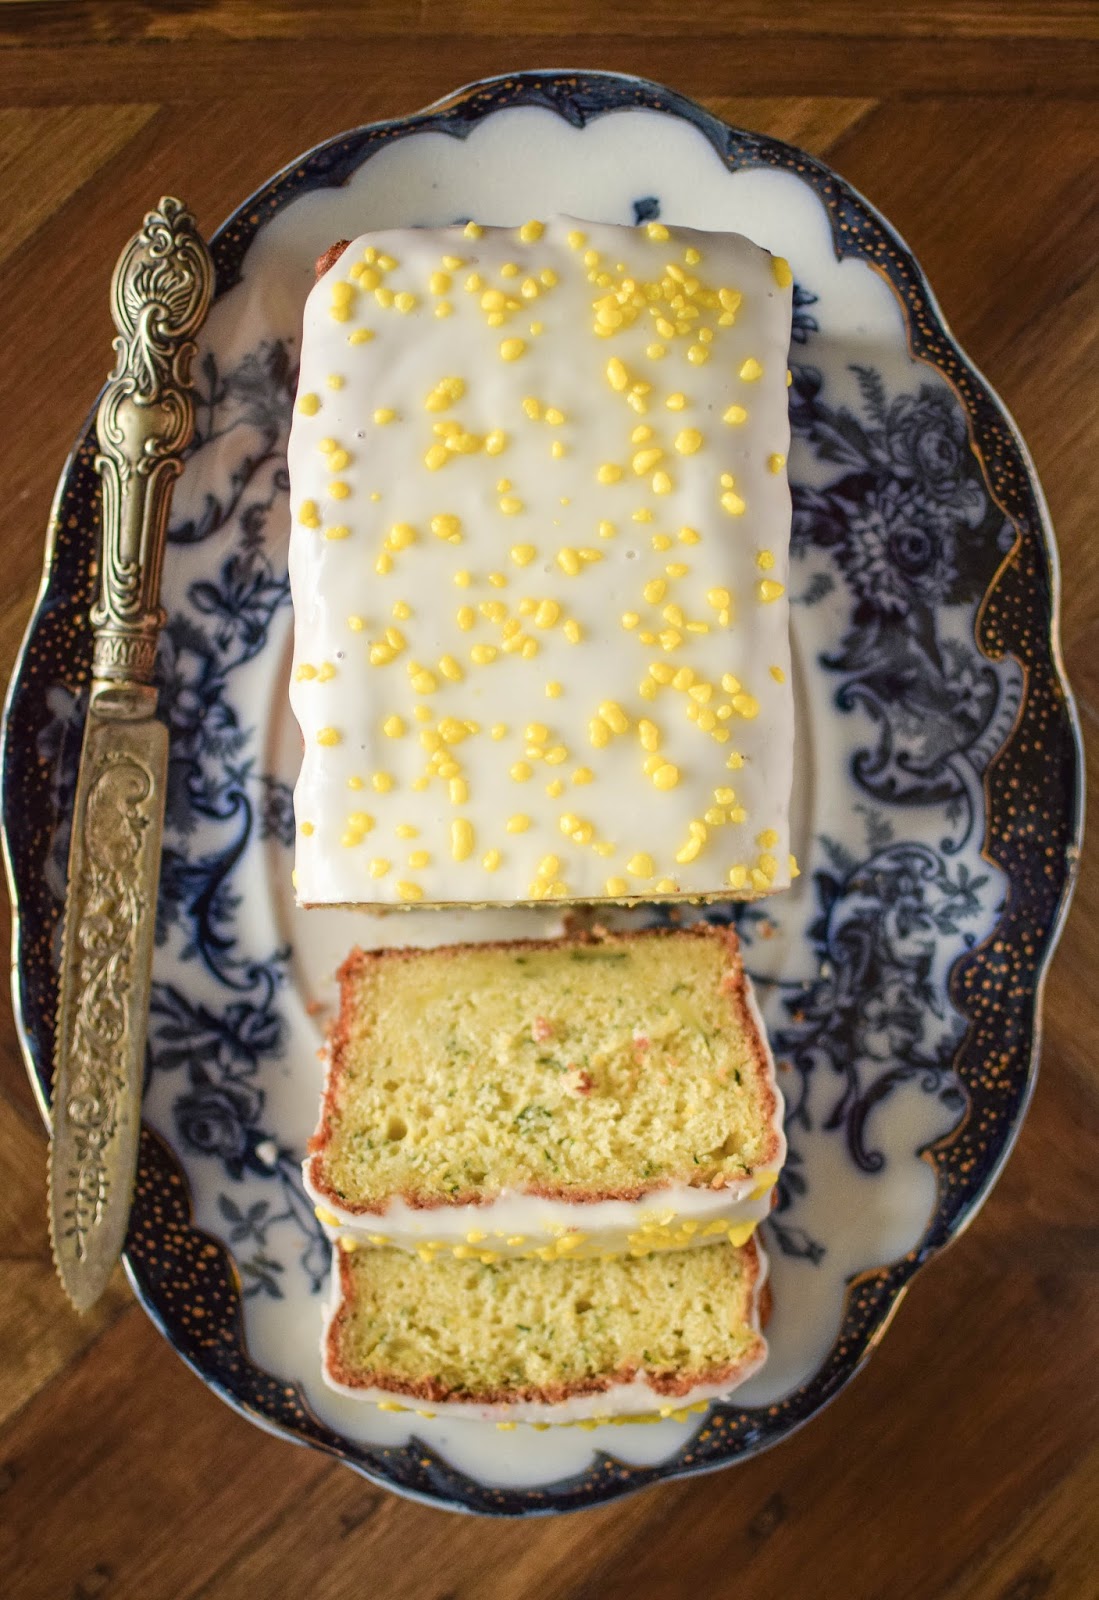 Lemon Zucchini Loaf, who said carrots are the only vegetables allowed in cake?